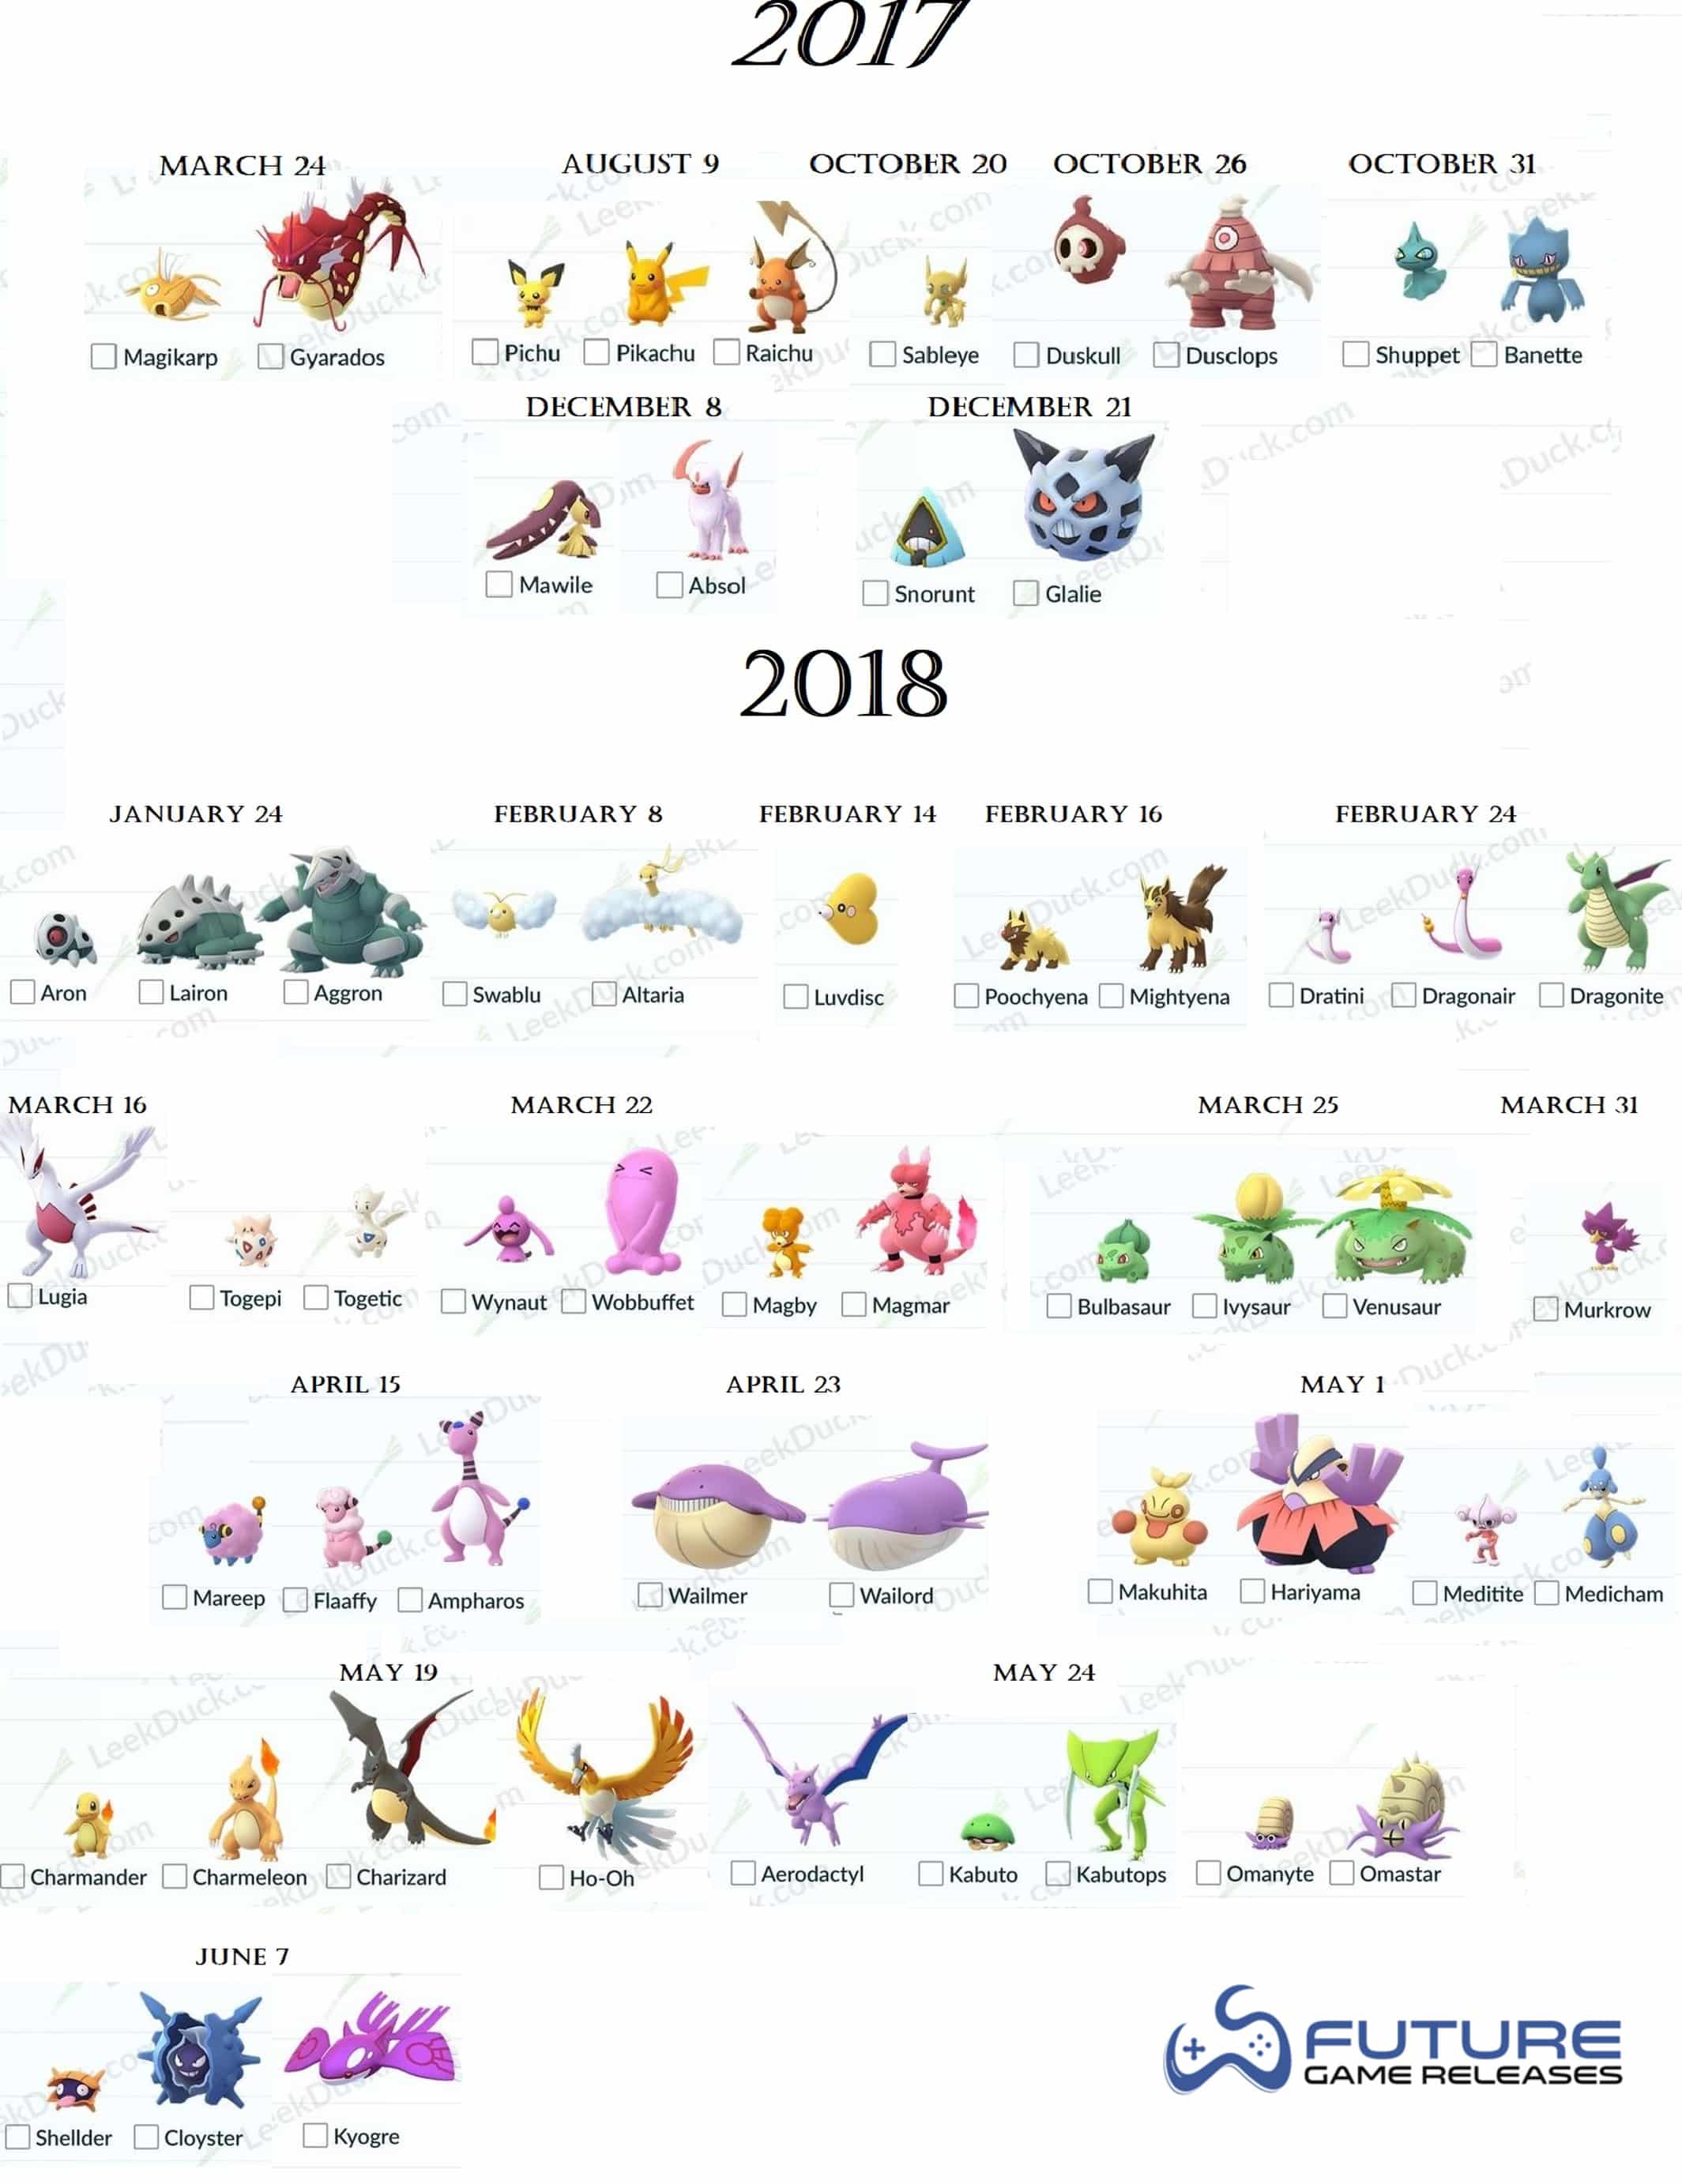 New, Updated List of All Shiny Pokemon in Pokemon Go, Dates Included